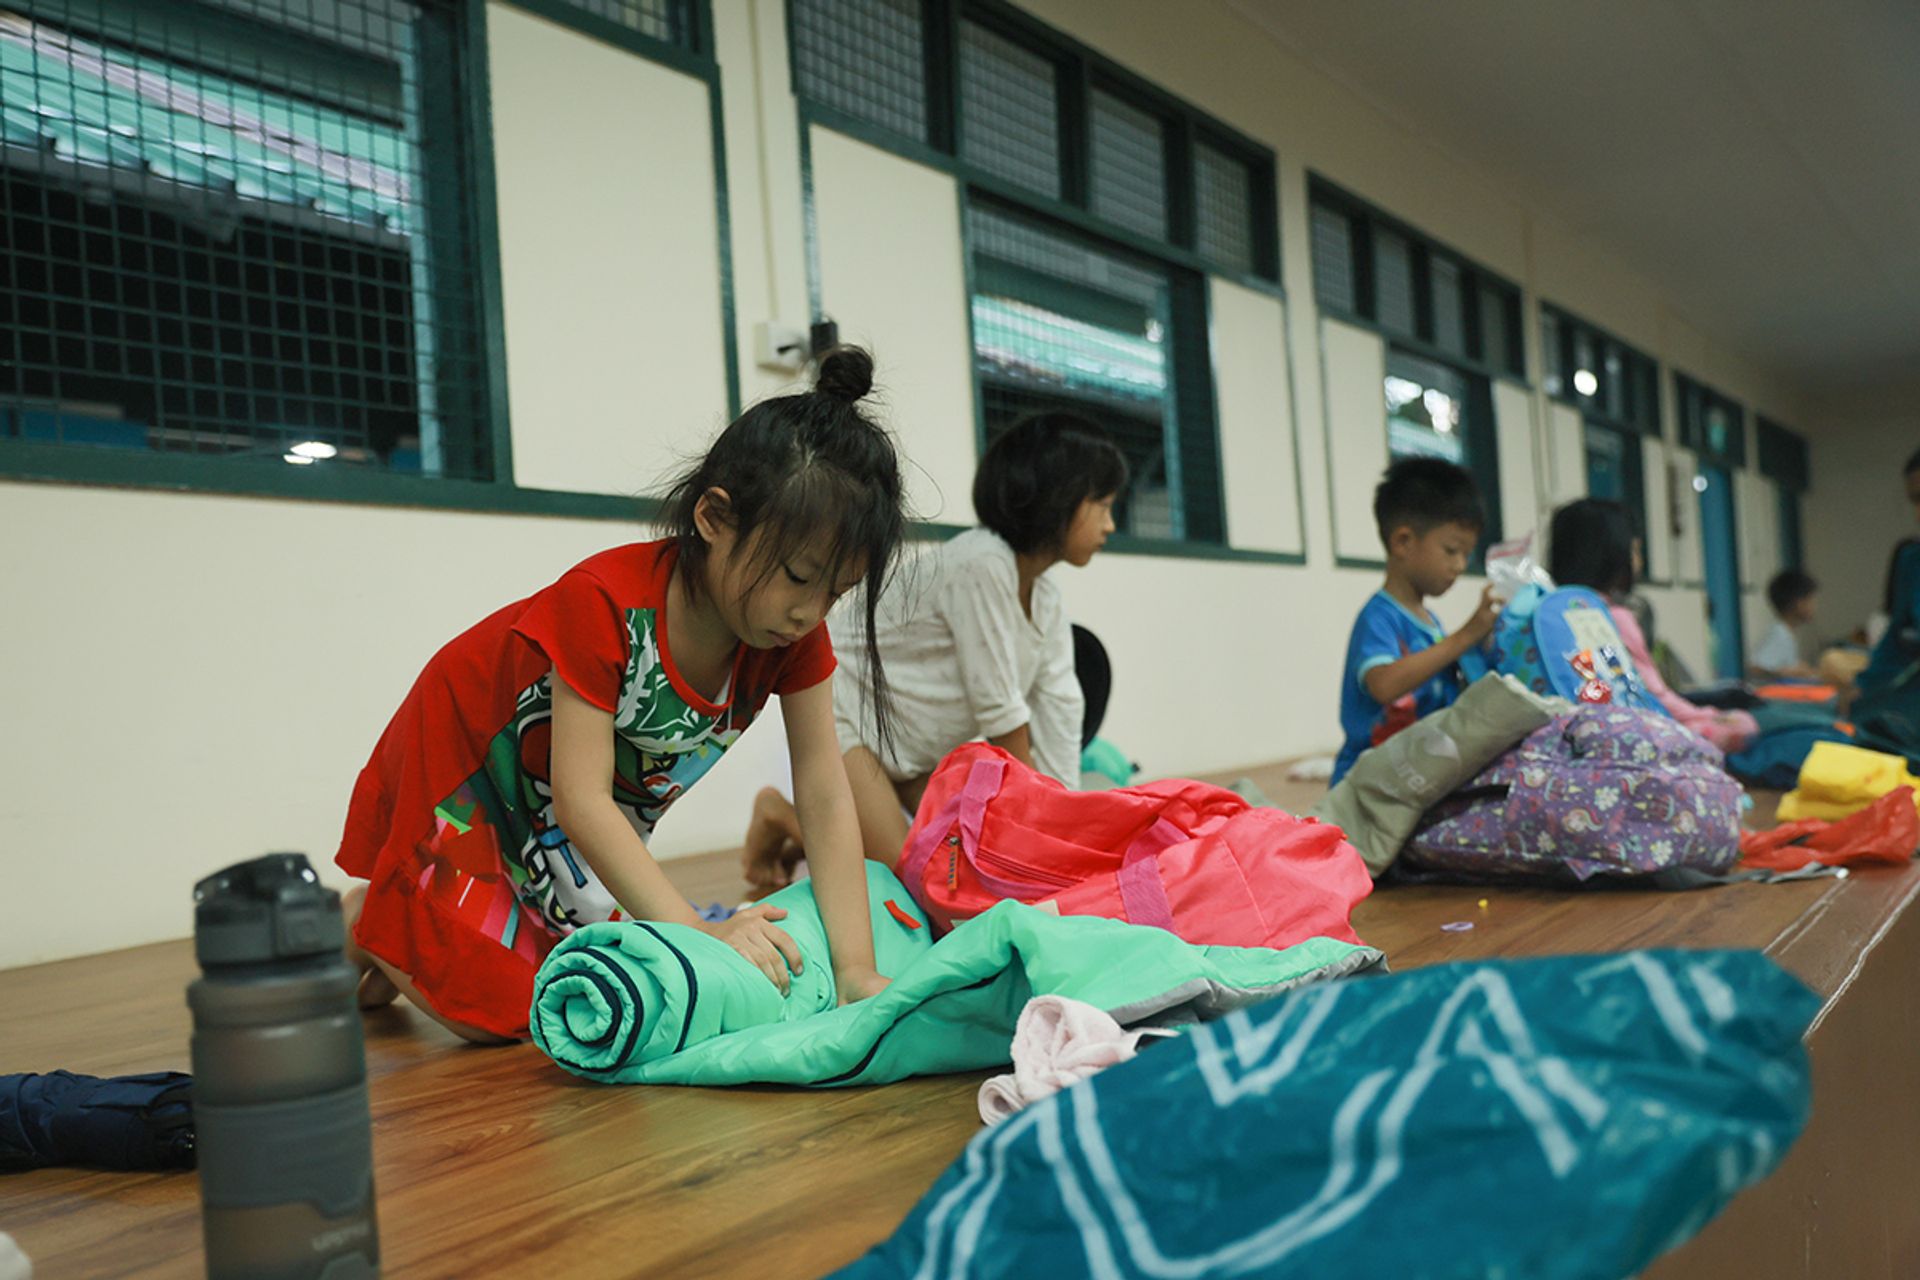 Ashley Oh (in red) rolls up her sleeping bag, as the children pack up to return home.